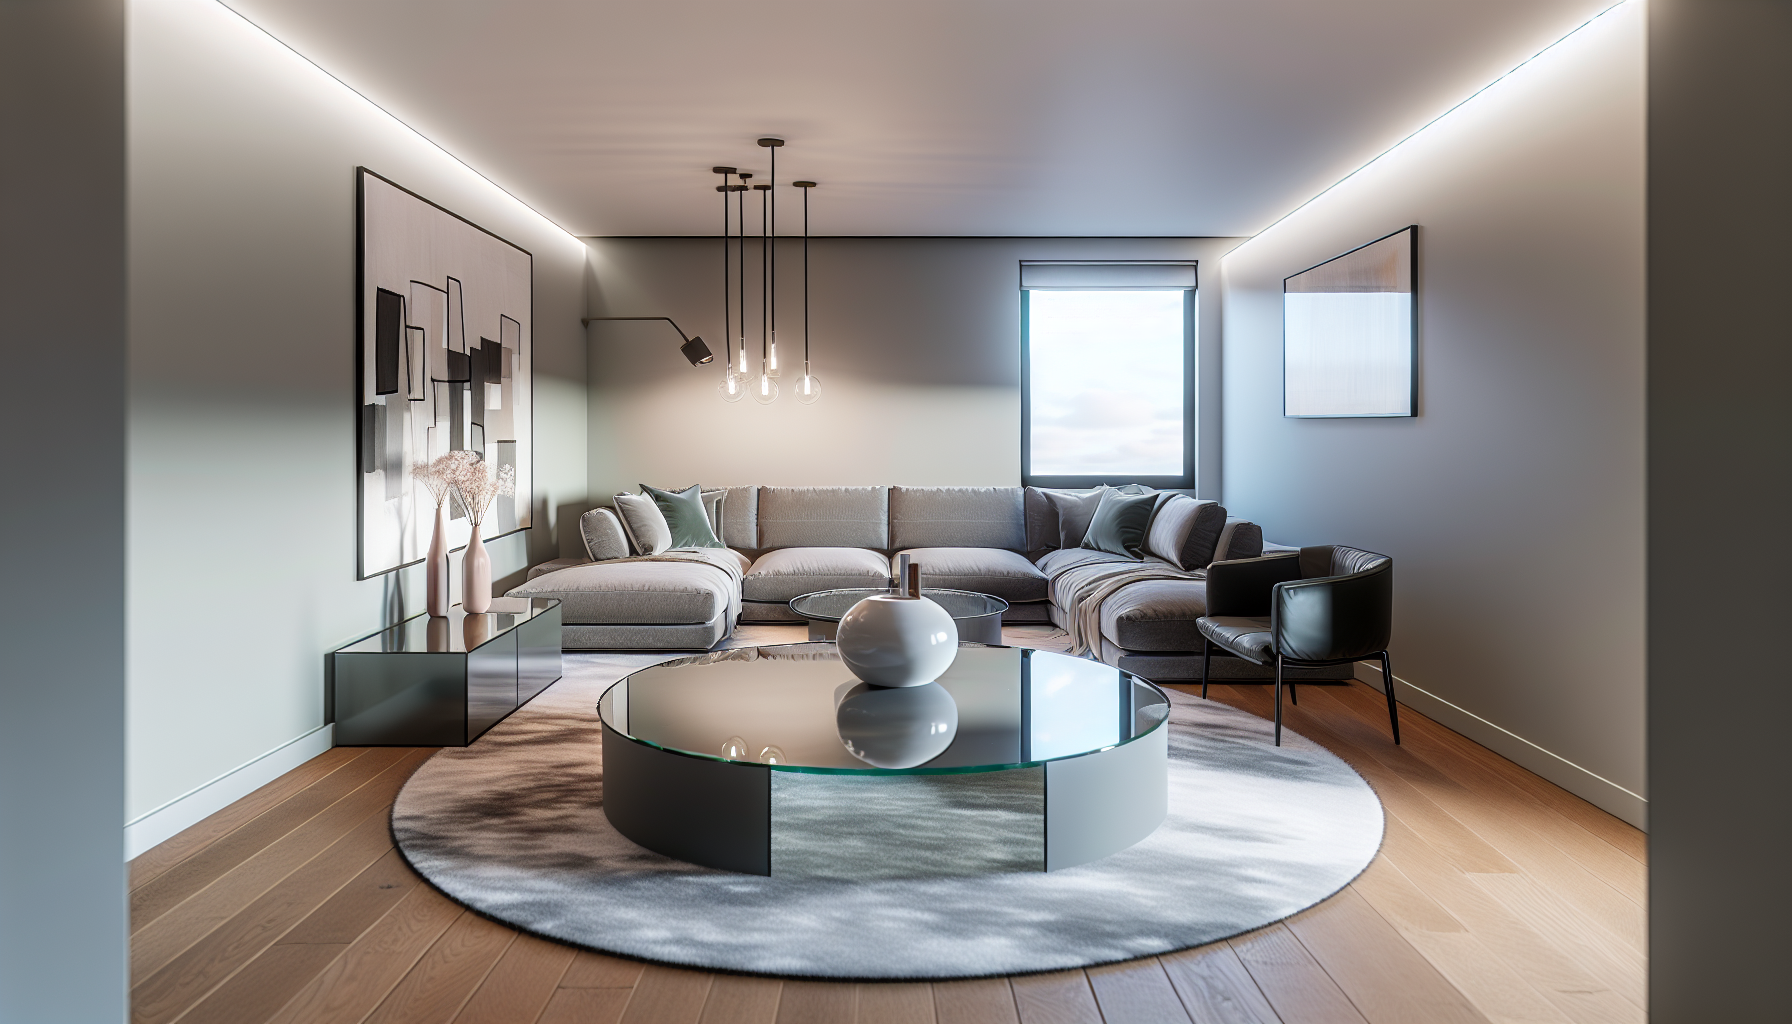 A modern living room with a stylish round coffee table